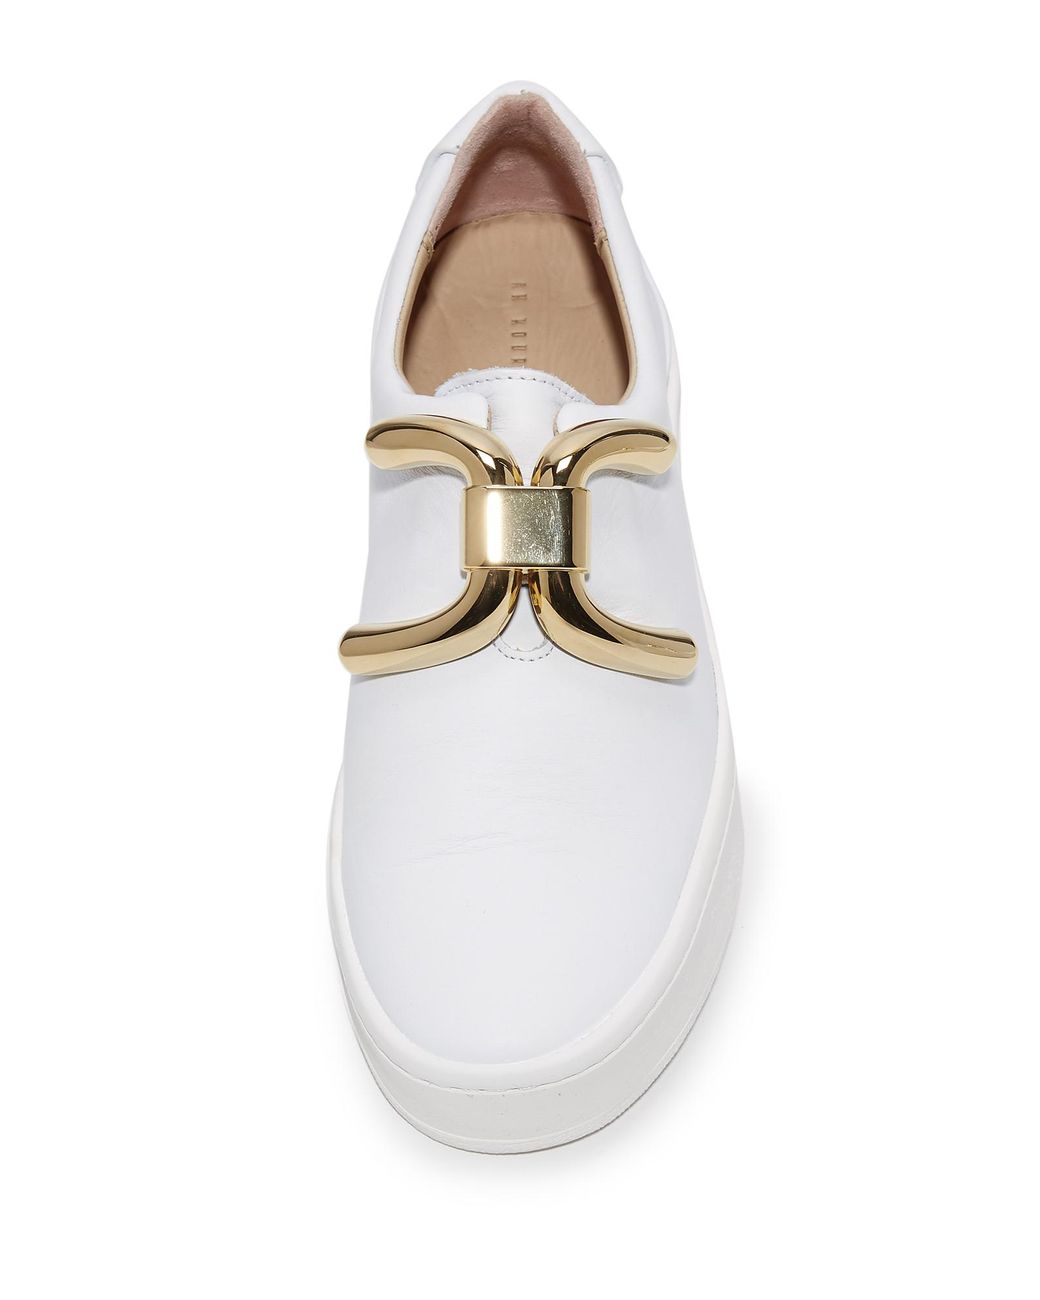 An Hour And A Shower Knot Sneakers in White | Lyst